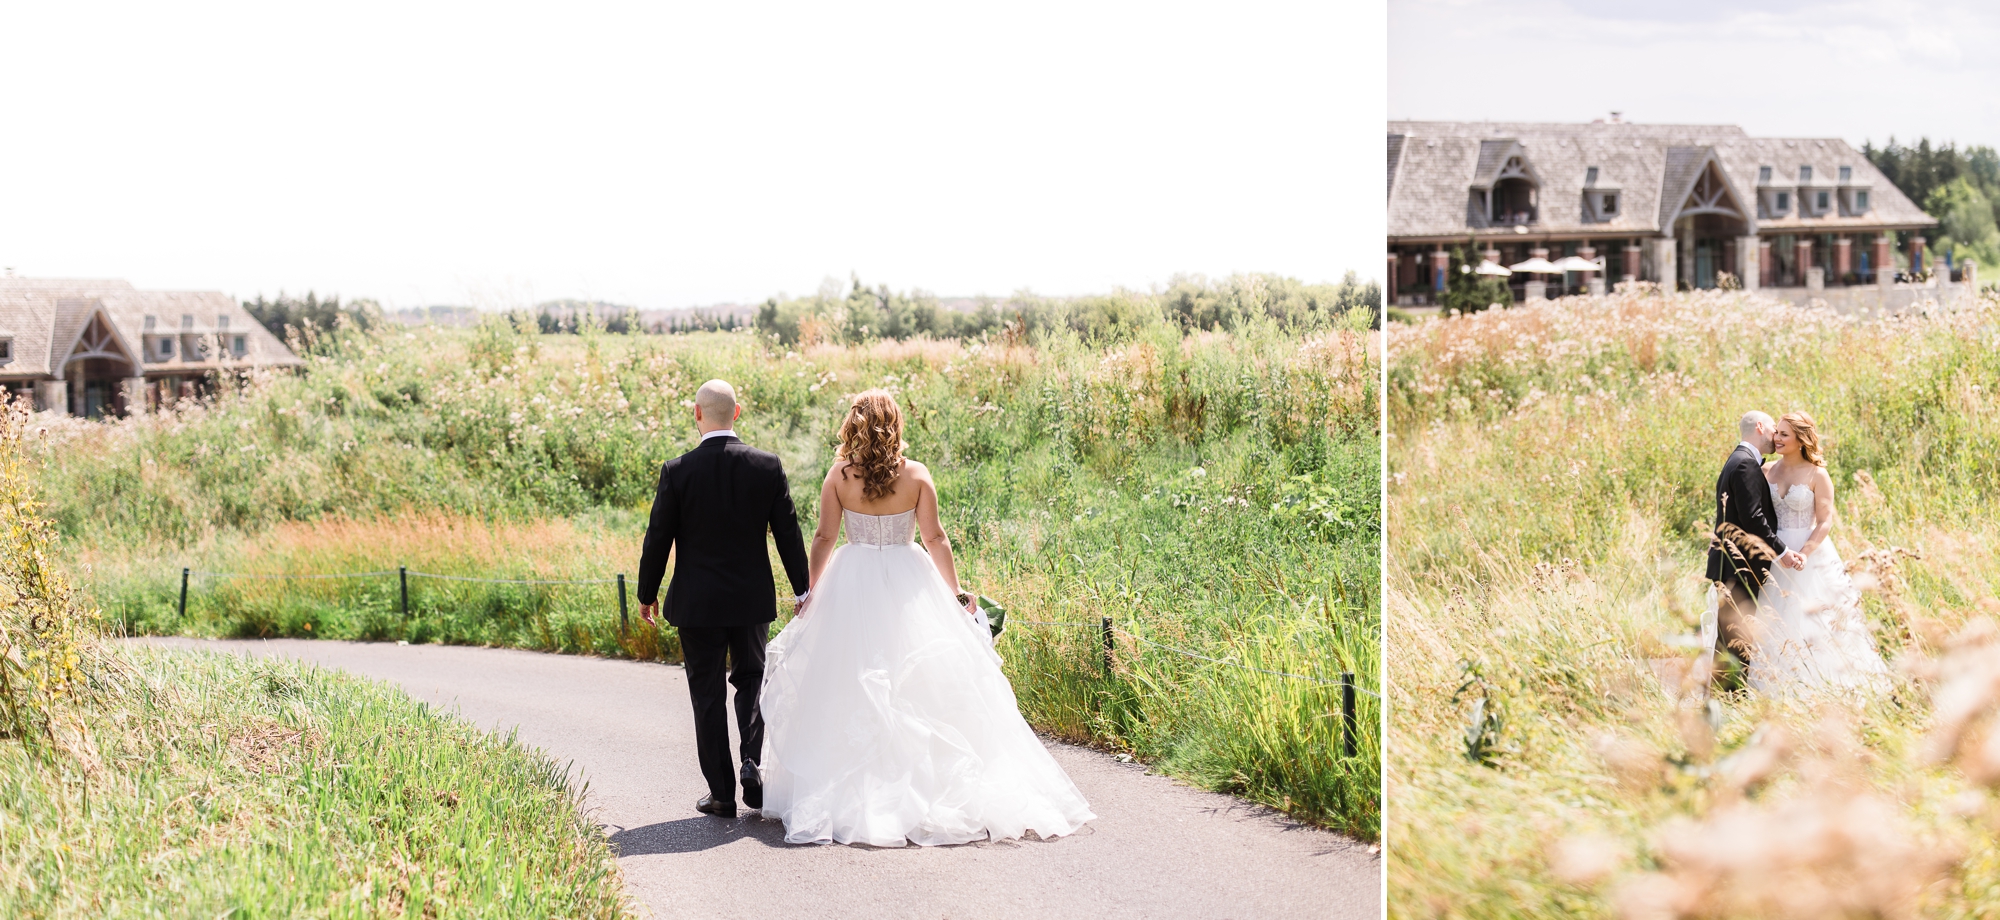 Toronto Wedding at Eagles Nest. Back view of the bride and groom walking down the golf cart path between fields